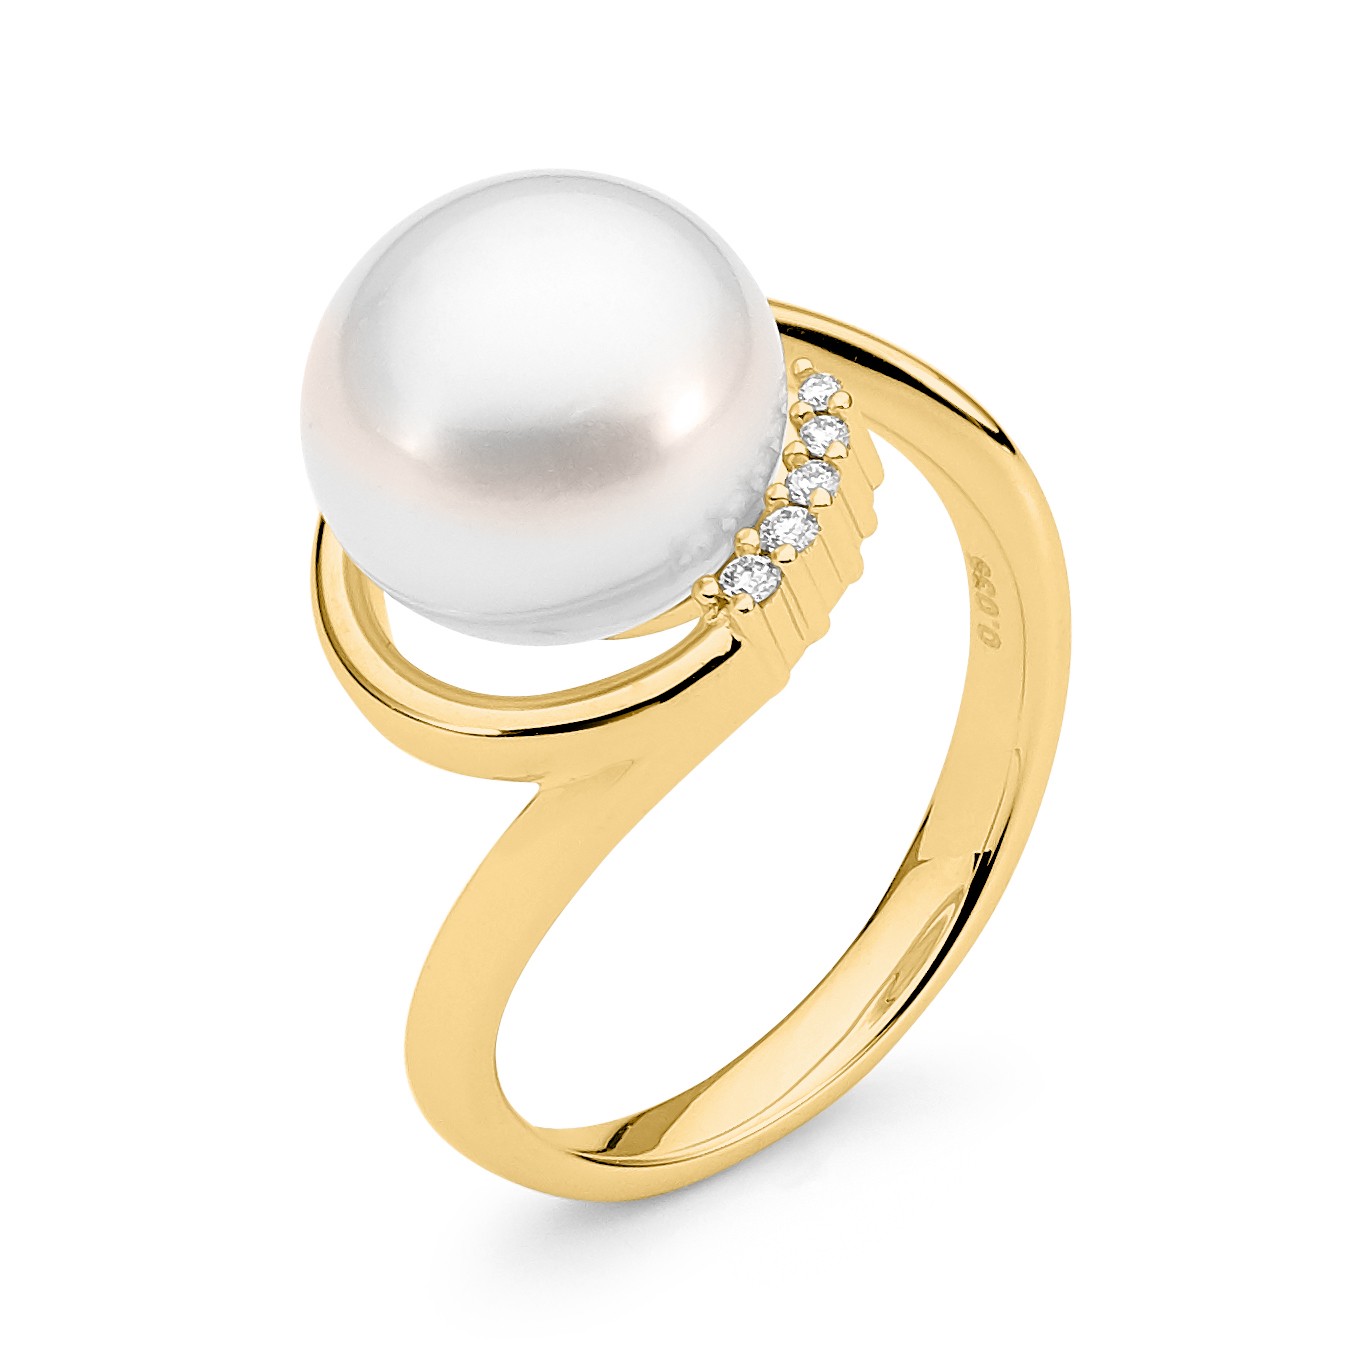 Faceted Pearl Ring - Allure South Sea Pearls